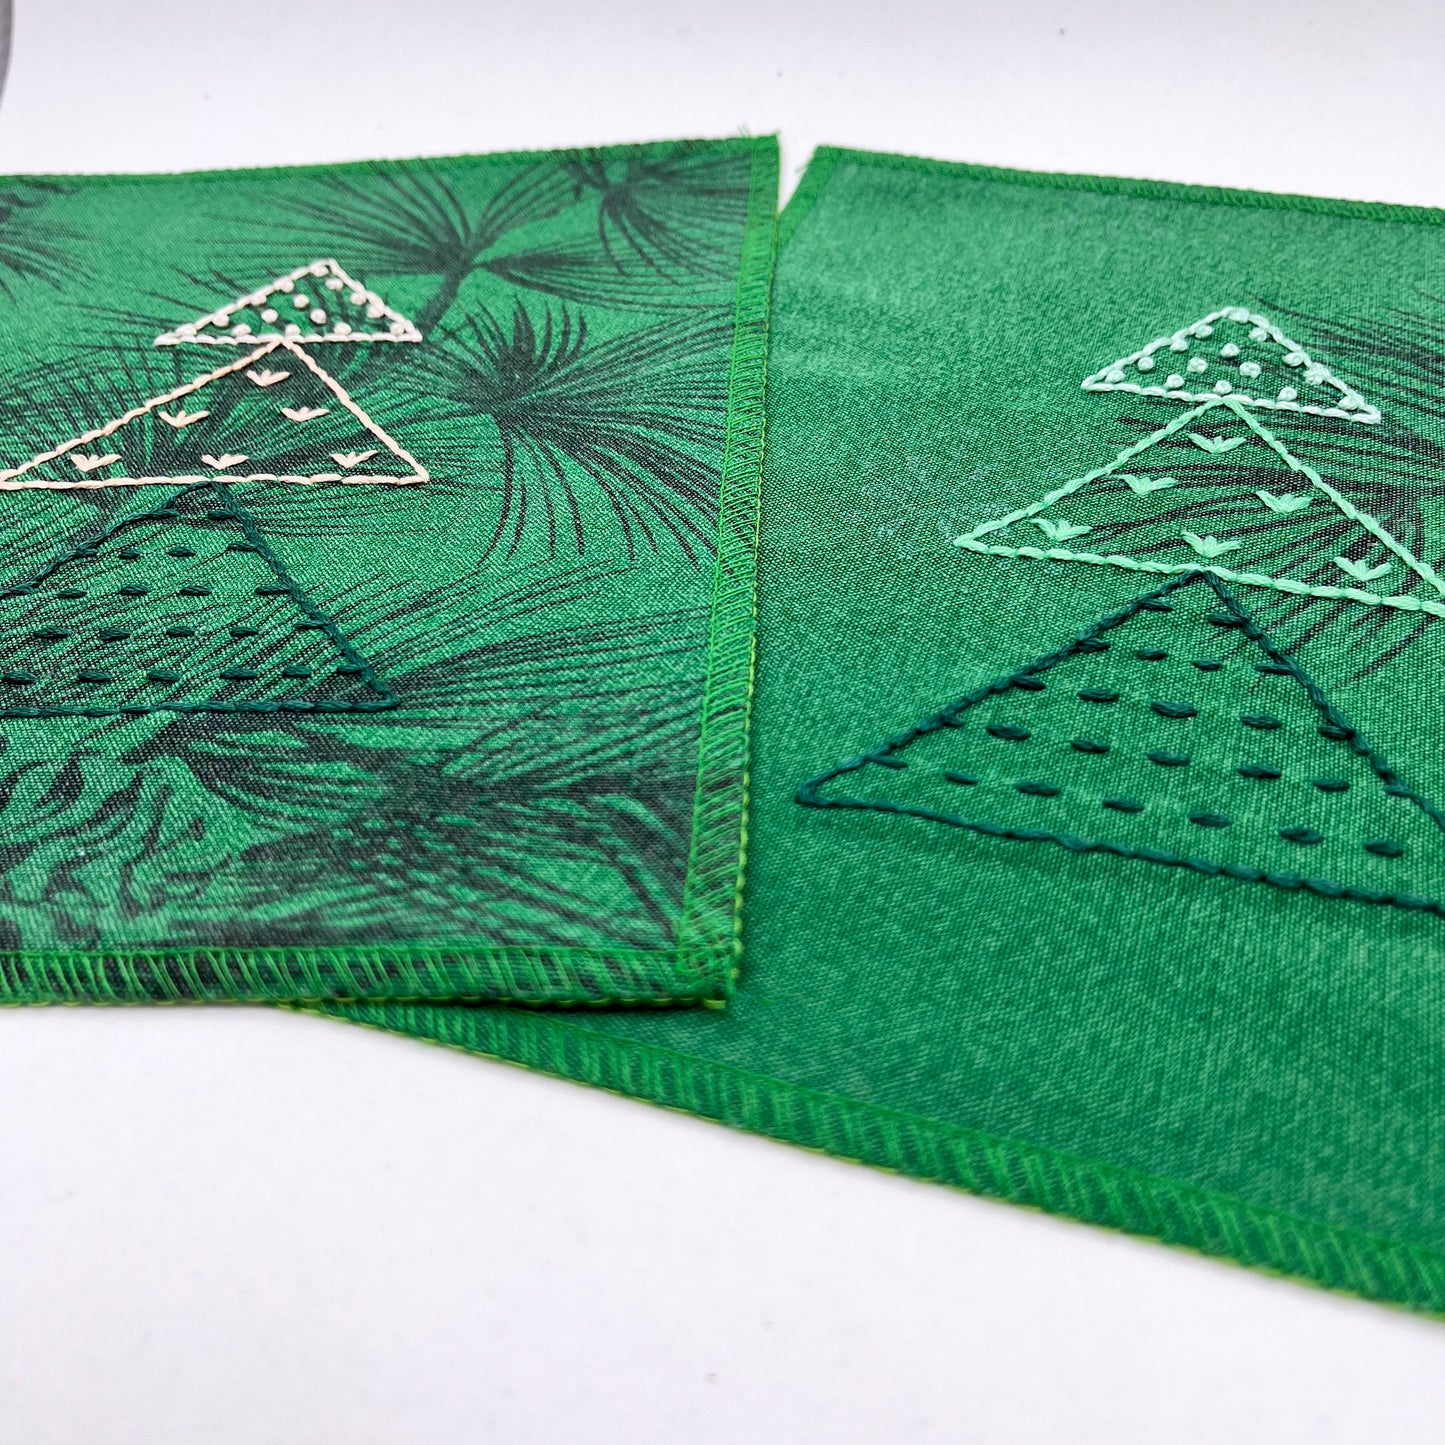 two fabric wall hangings made from bright green fabric with pine branches printed on them, and stitched over Christmas trees made from three triangles, each triangle filled with different types of stitches in different colors